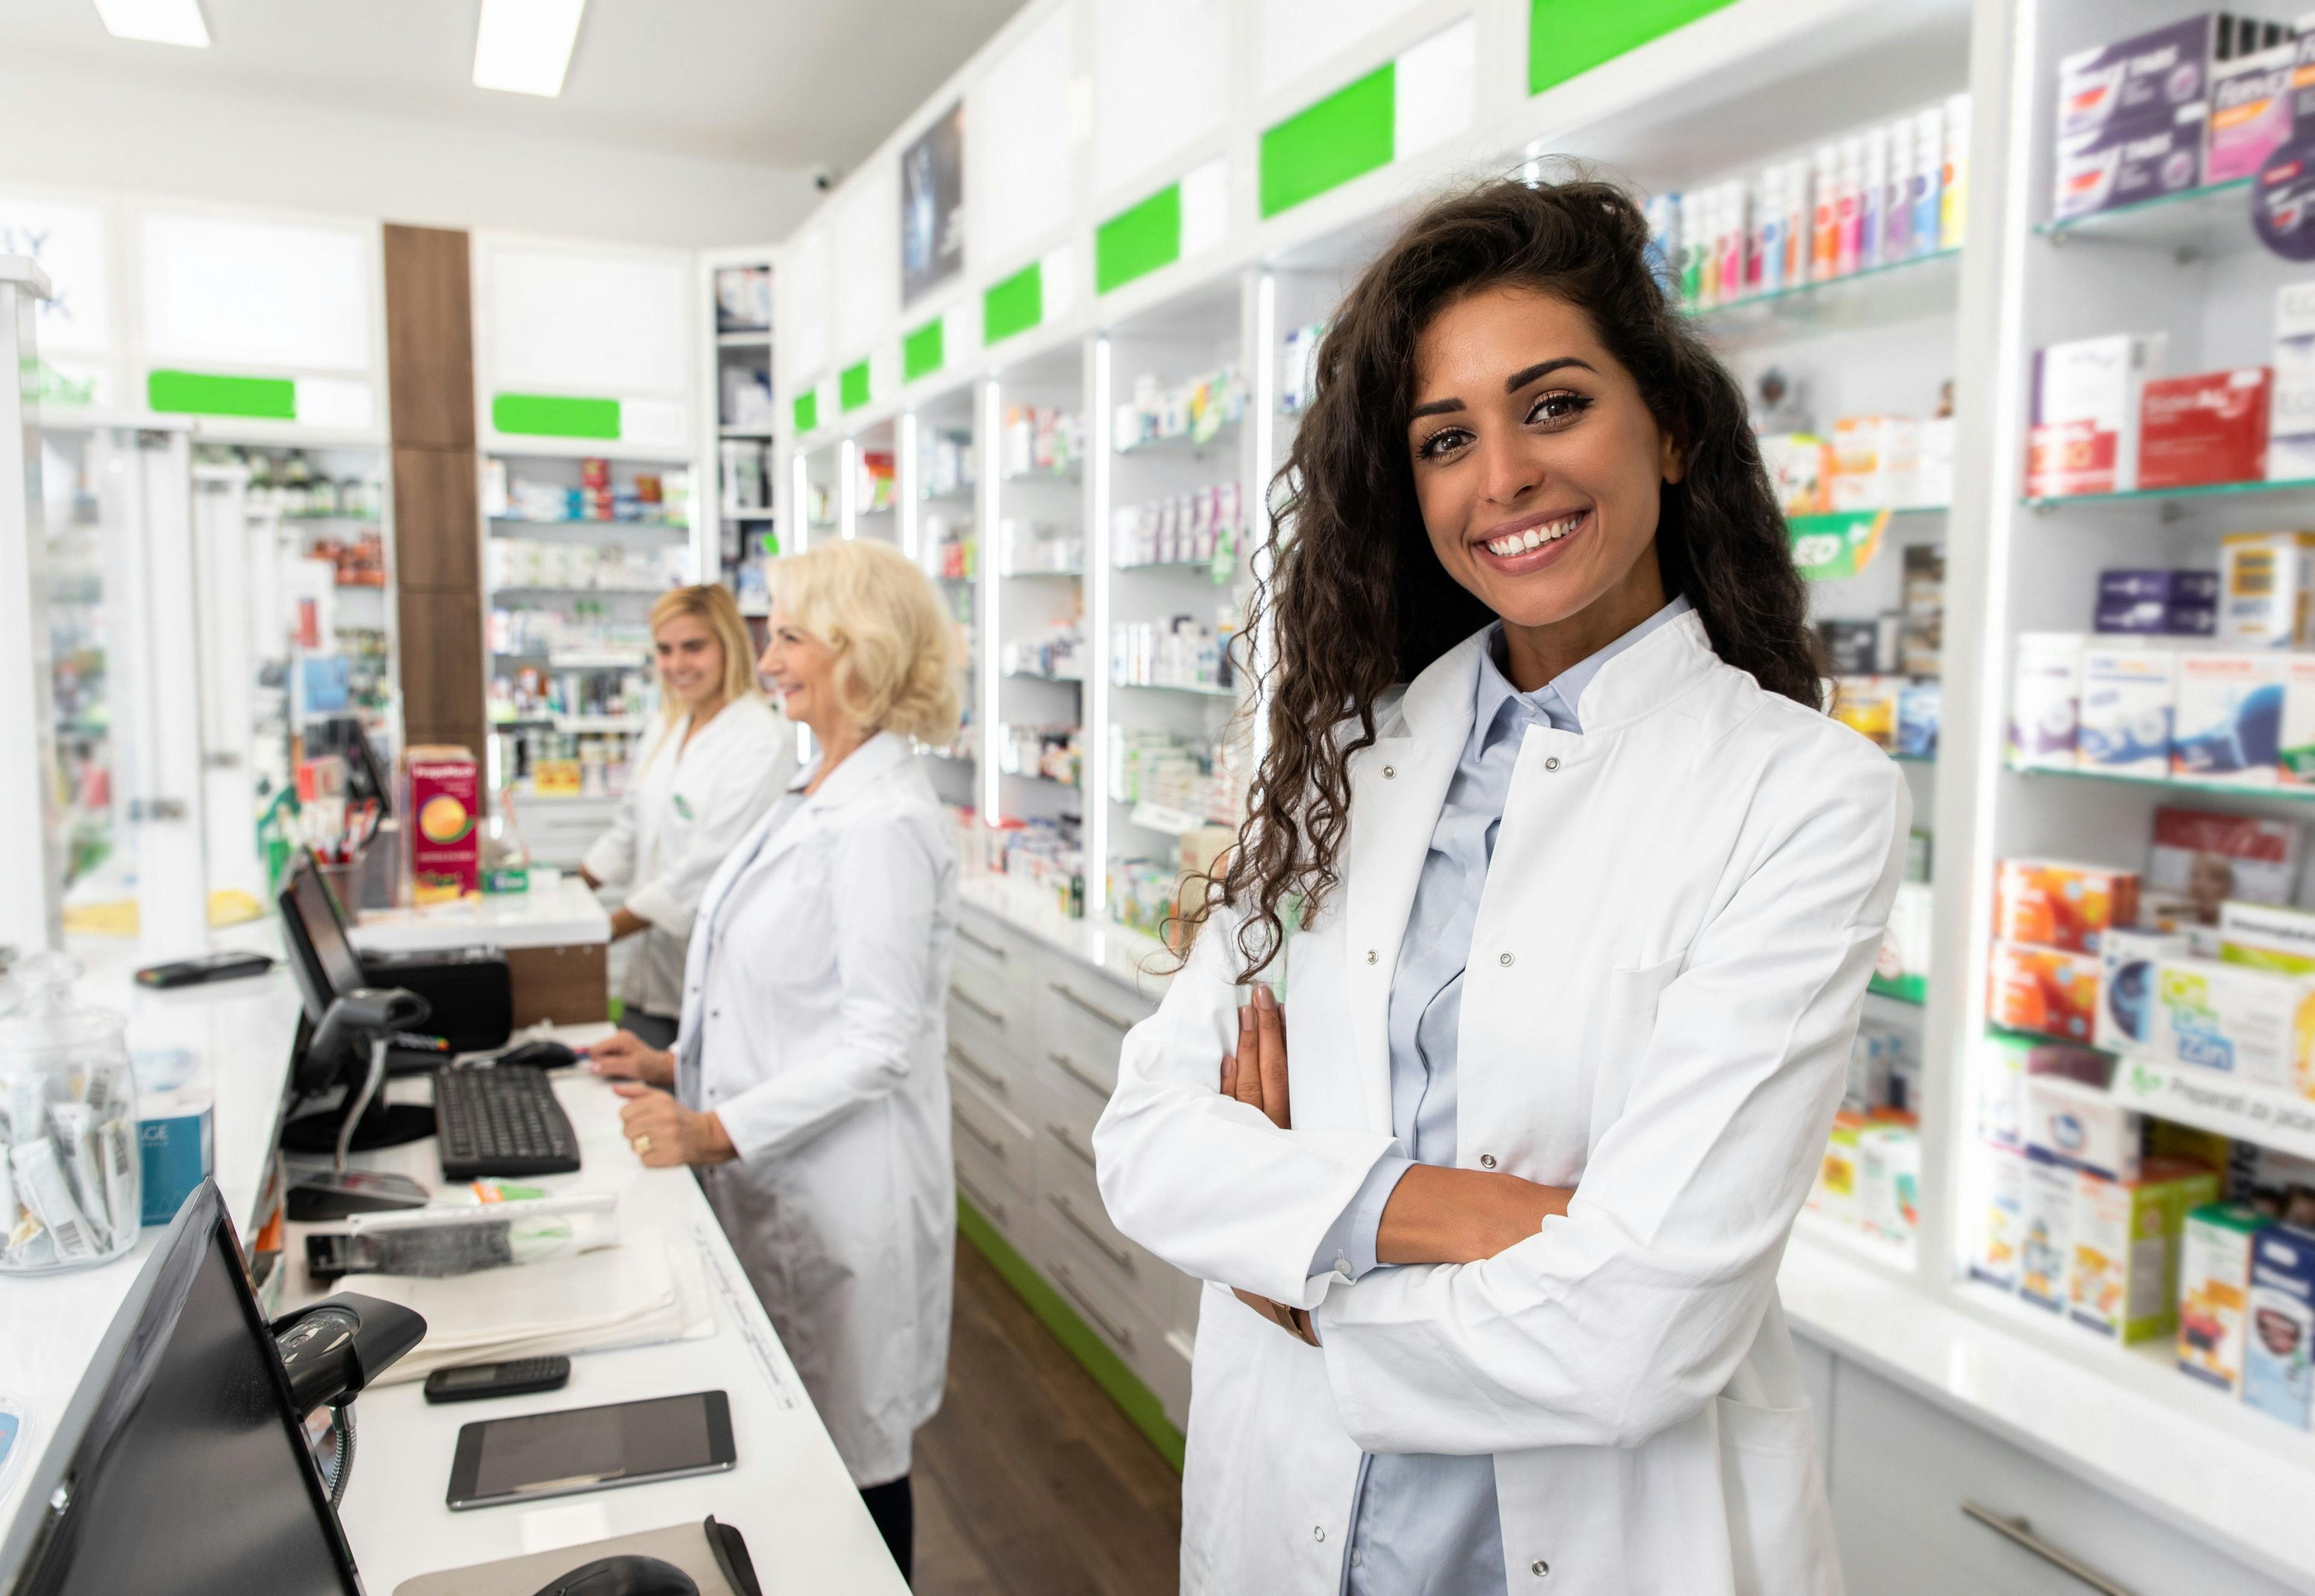 Full Scope of Pharmacy Practice: Reinventing the Future and Overcoming Barriers